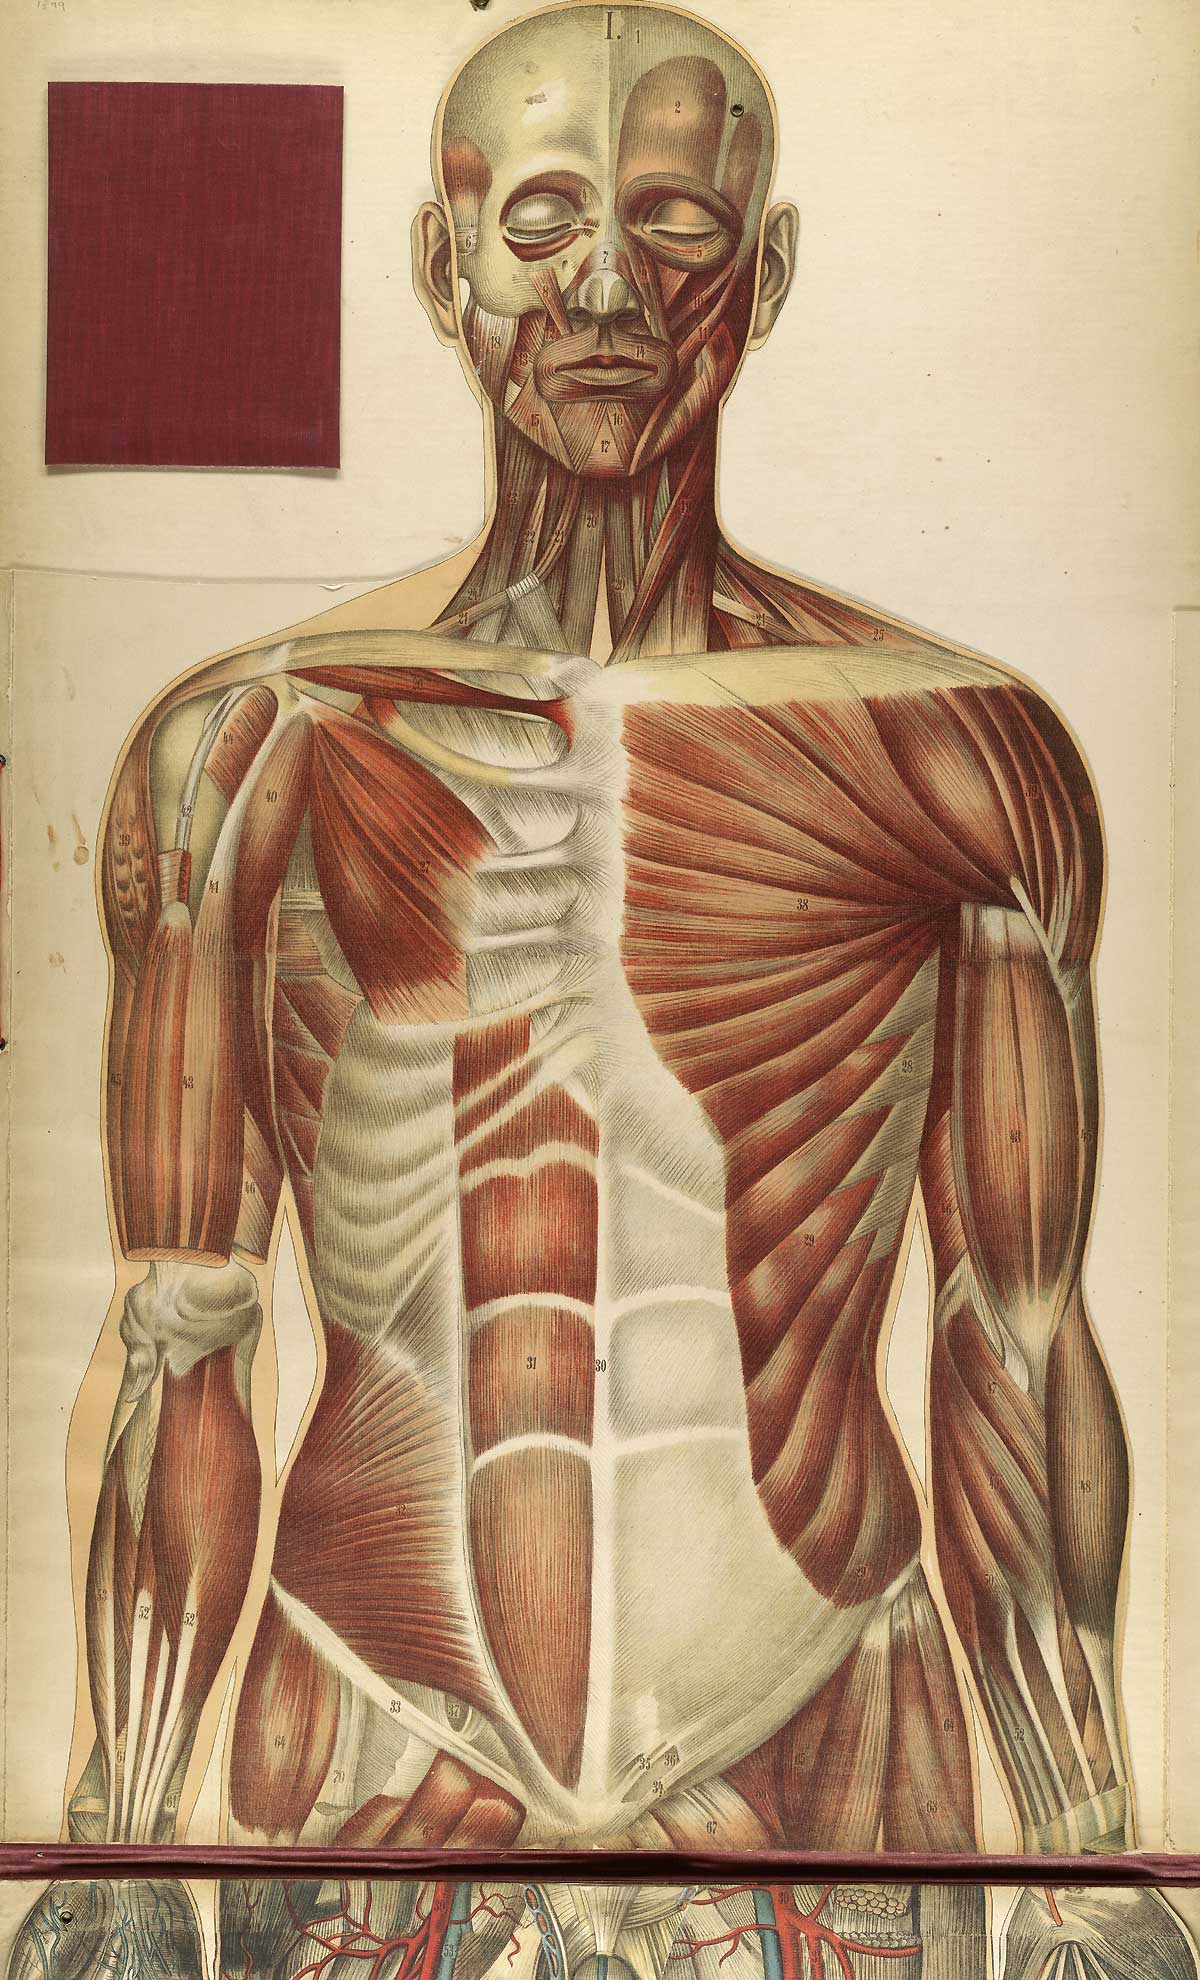 Chromolithograph showing the musculature of the upper half of the front of the human body, from Julien Bouglé’s Le corps humain en grandeur naturelle, NLM Call no. WE B758c 1899.